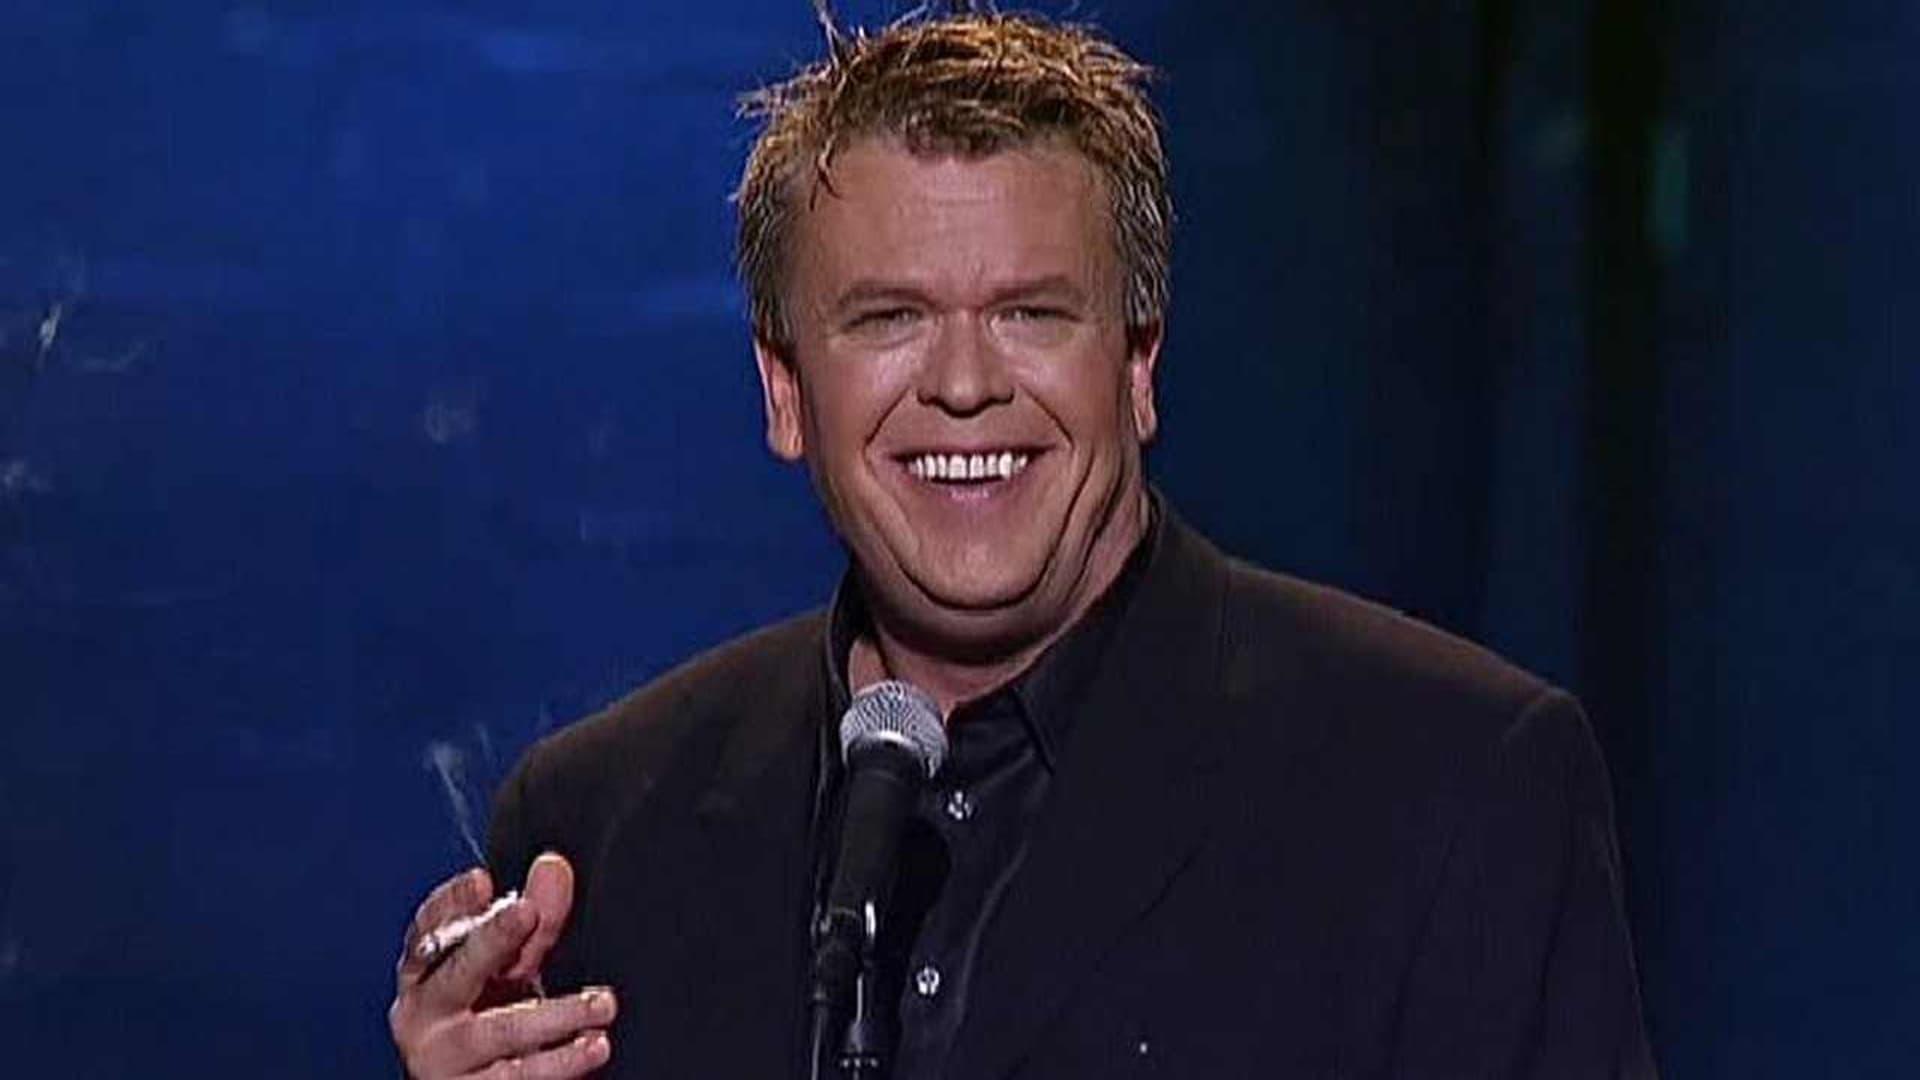 Ron White: They Call Me Tater Salad backdrop